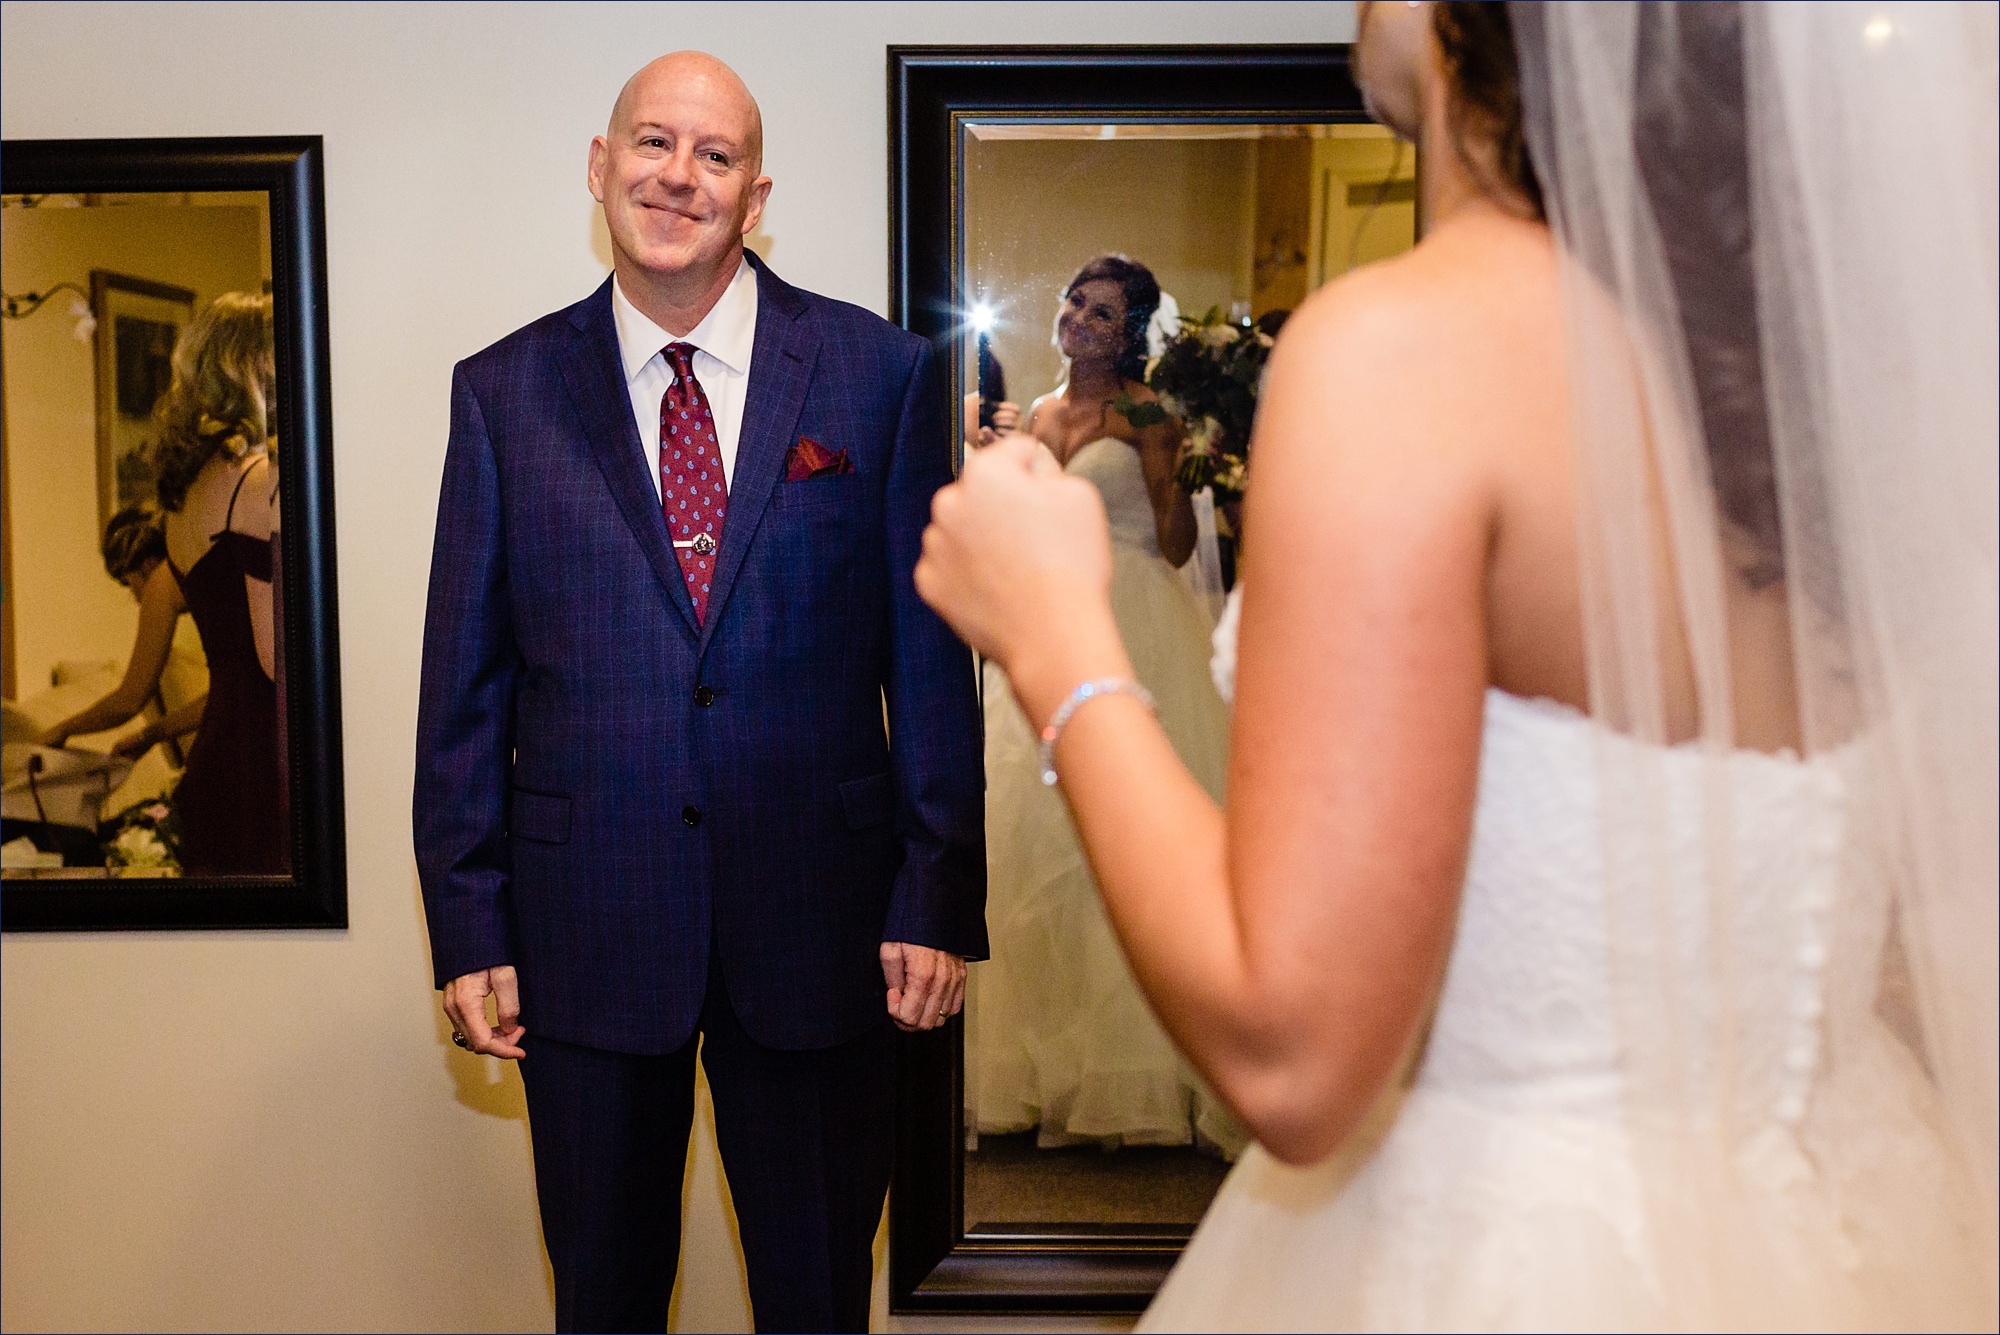 The bride does a first look with her father and he beams at her